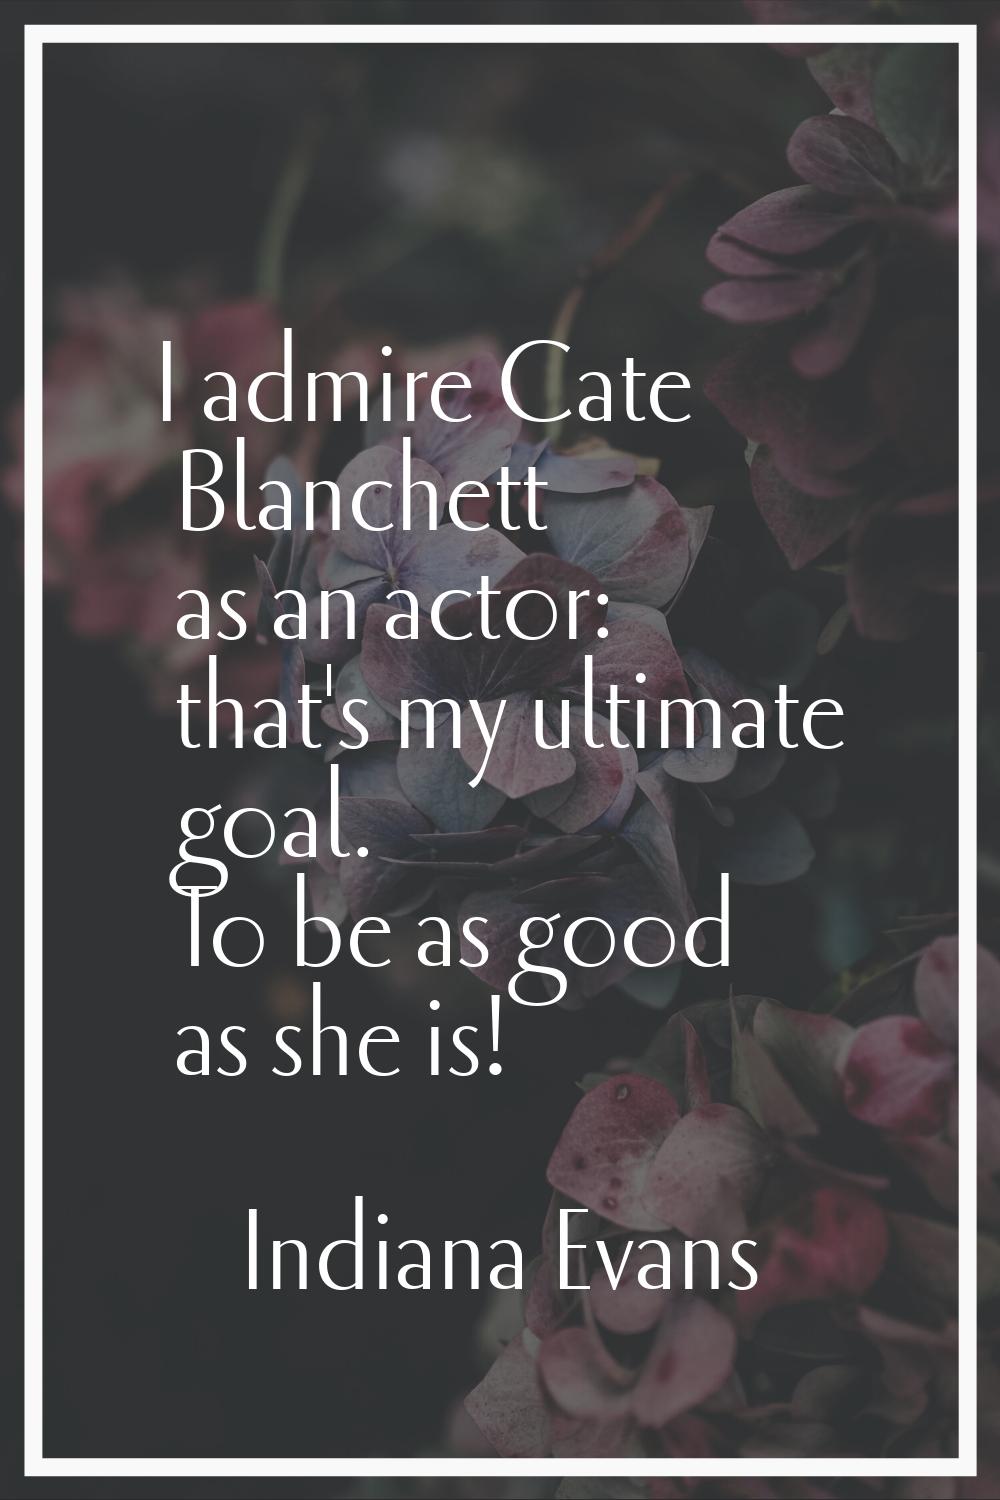 I admire Cate Blanchett as an actor: that's my ultimate goal. To be as good as she is!